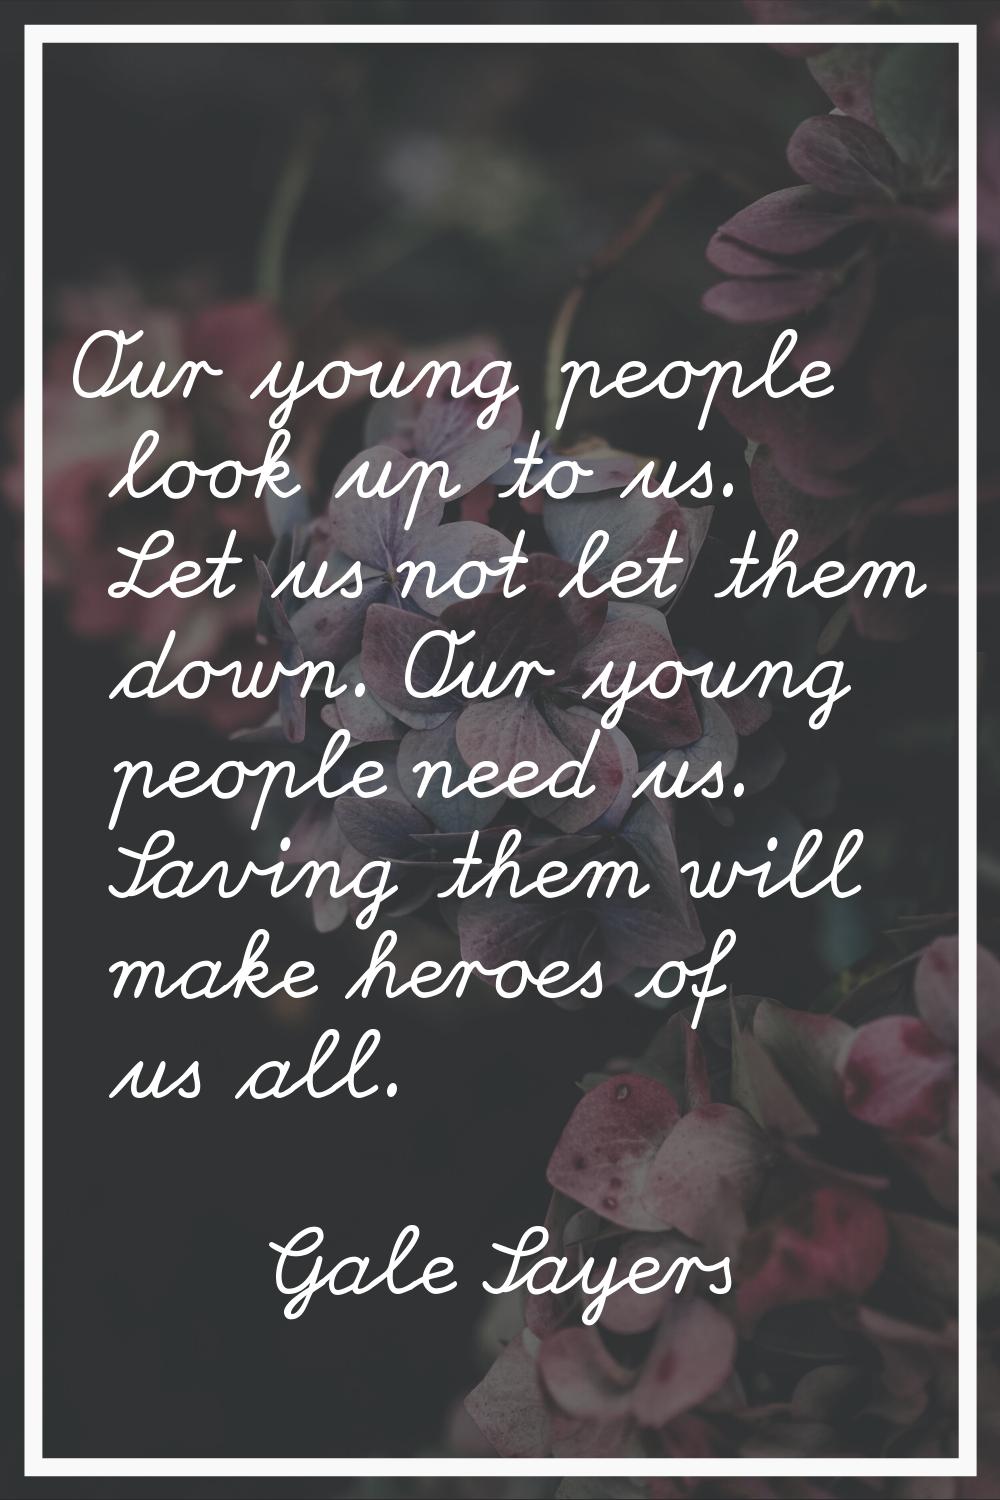 Our young people look up to us. Let us not let them down. Our young people need us. Saving them wil